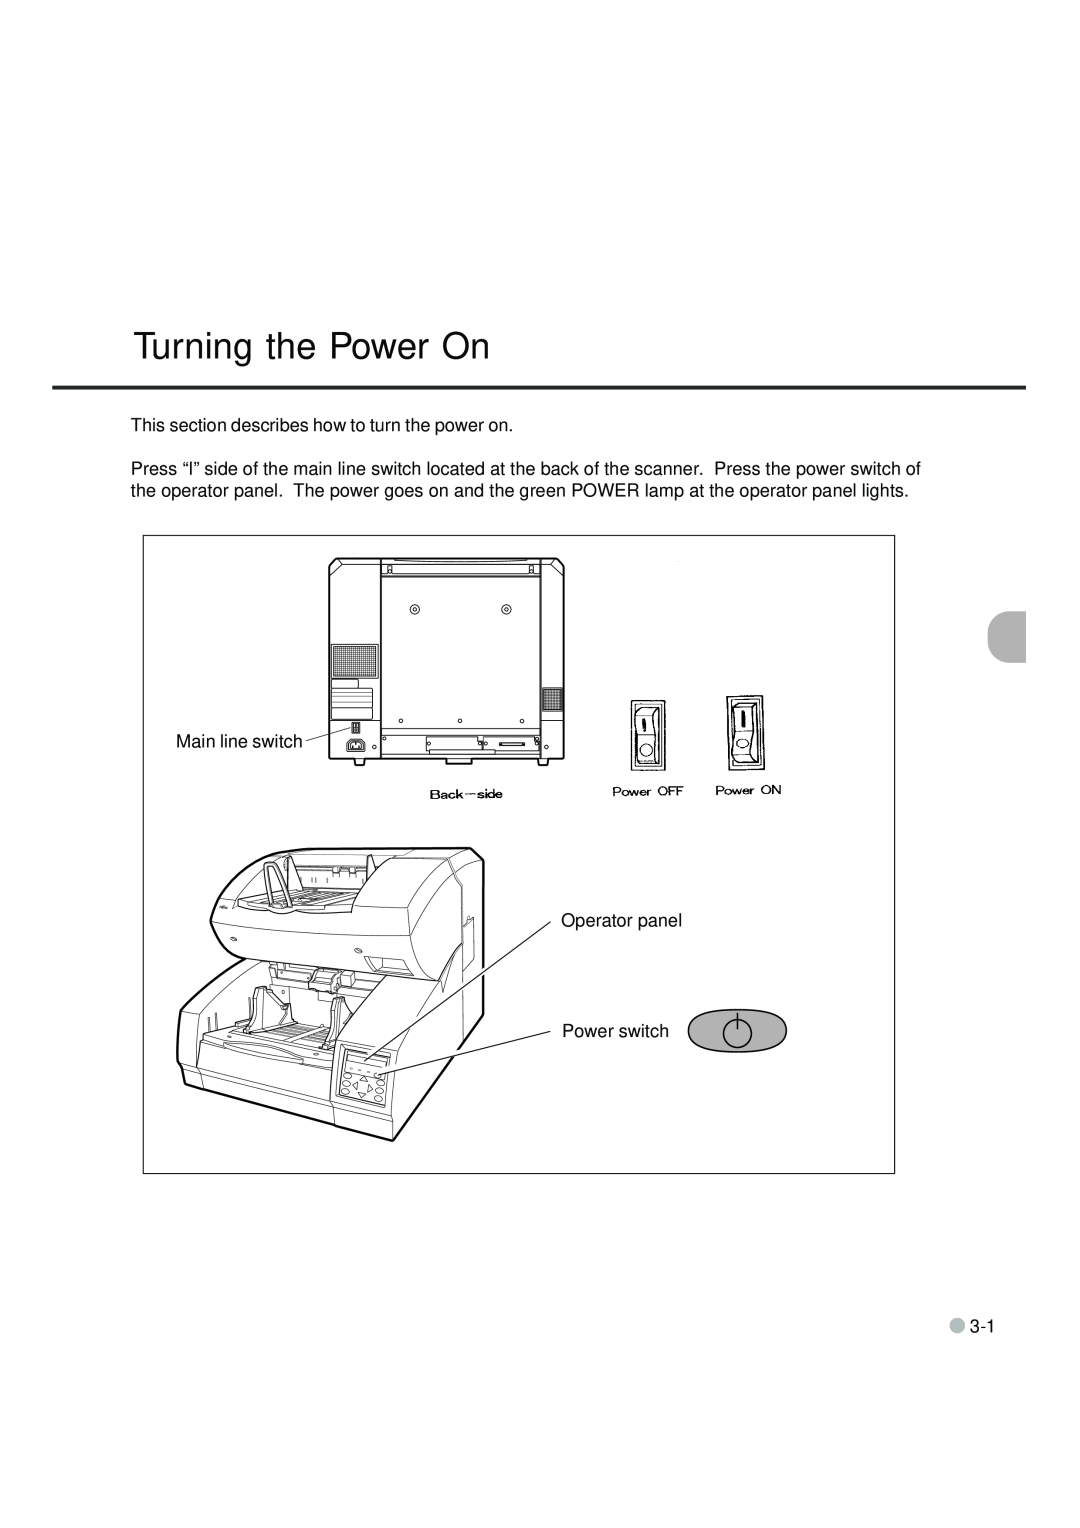 Fujitsu fi-4990C manual Turning the Power On, This section describes how to turn the power on, Main line switch 